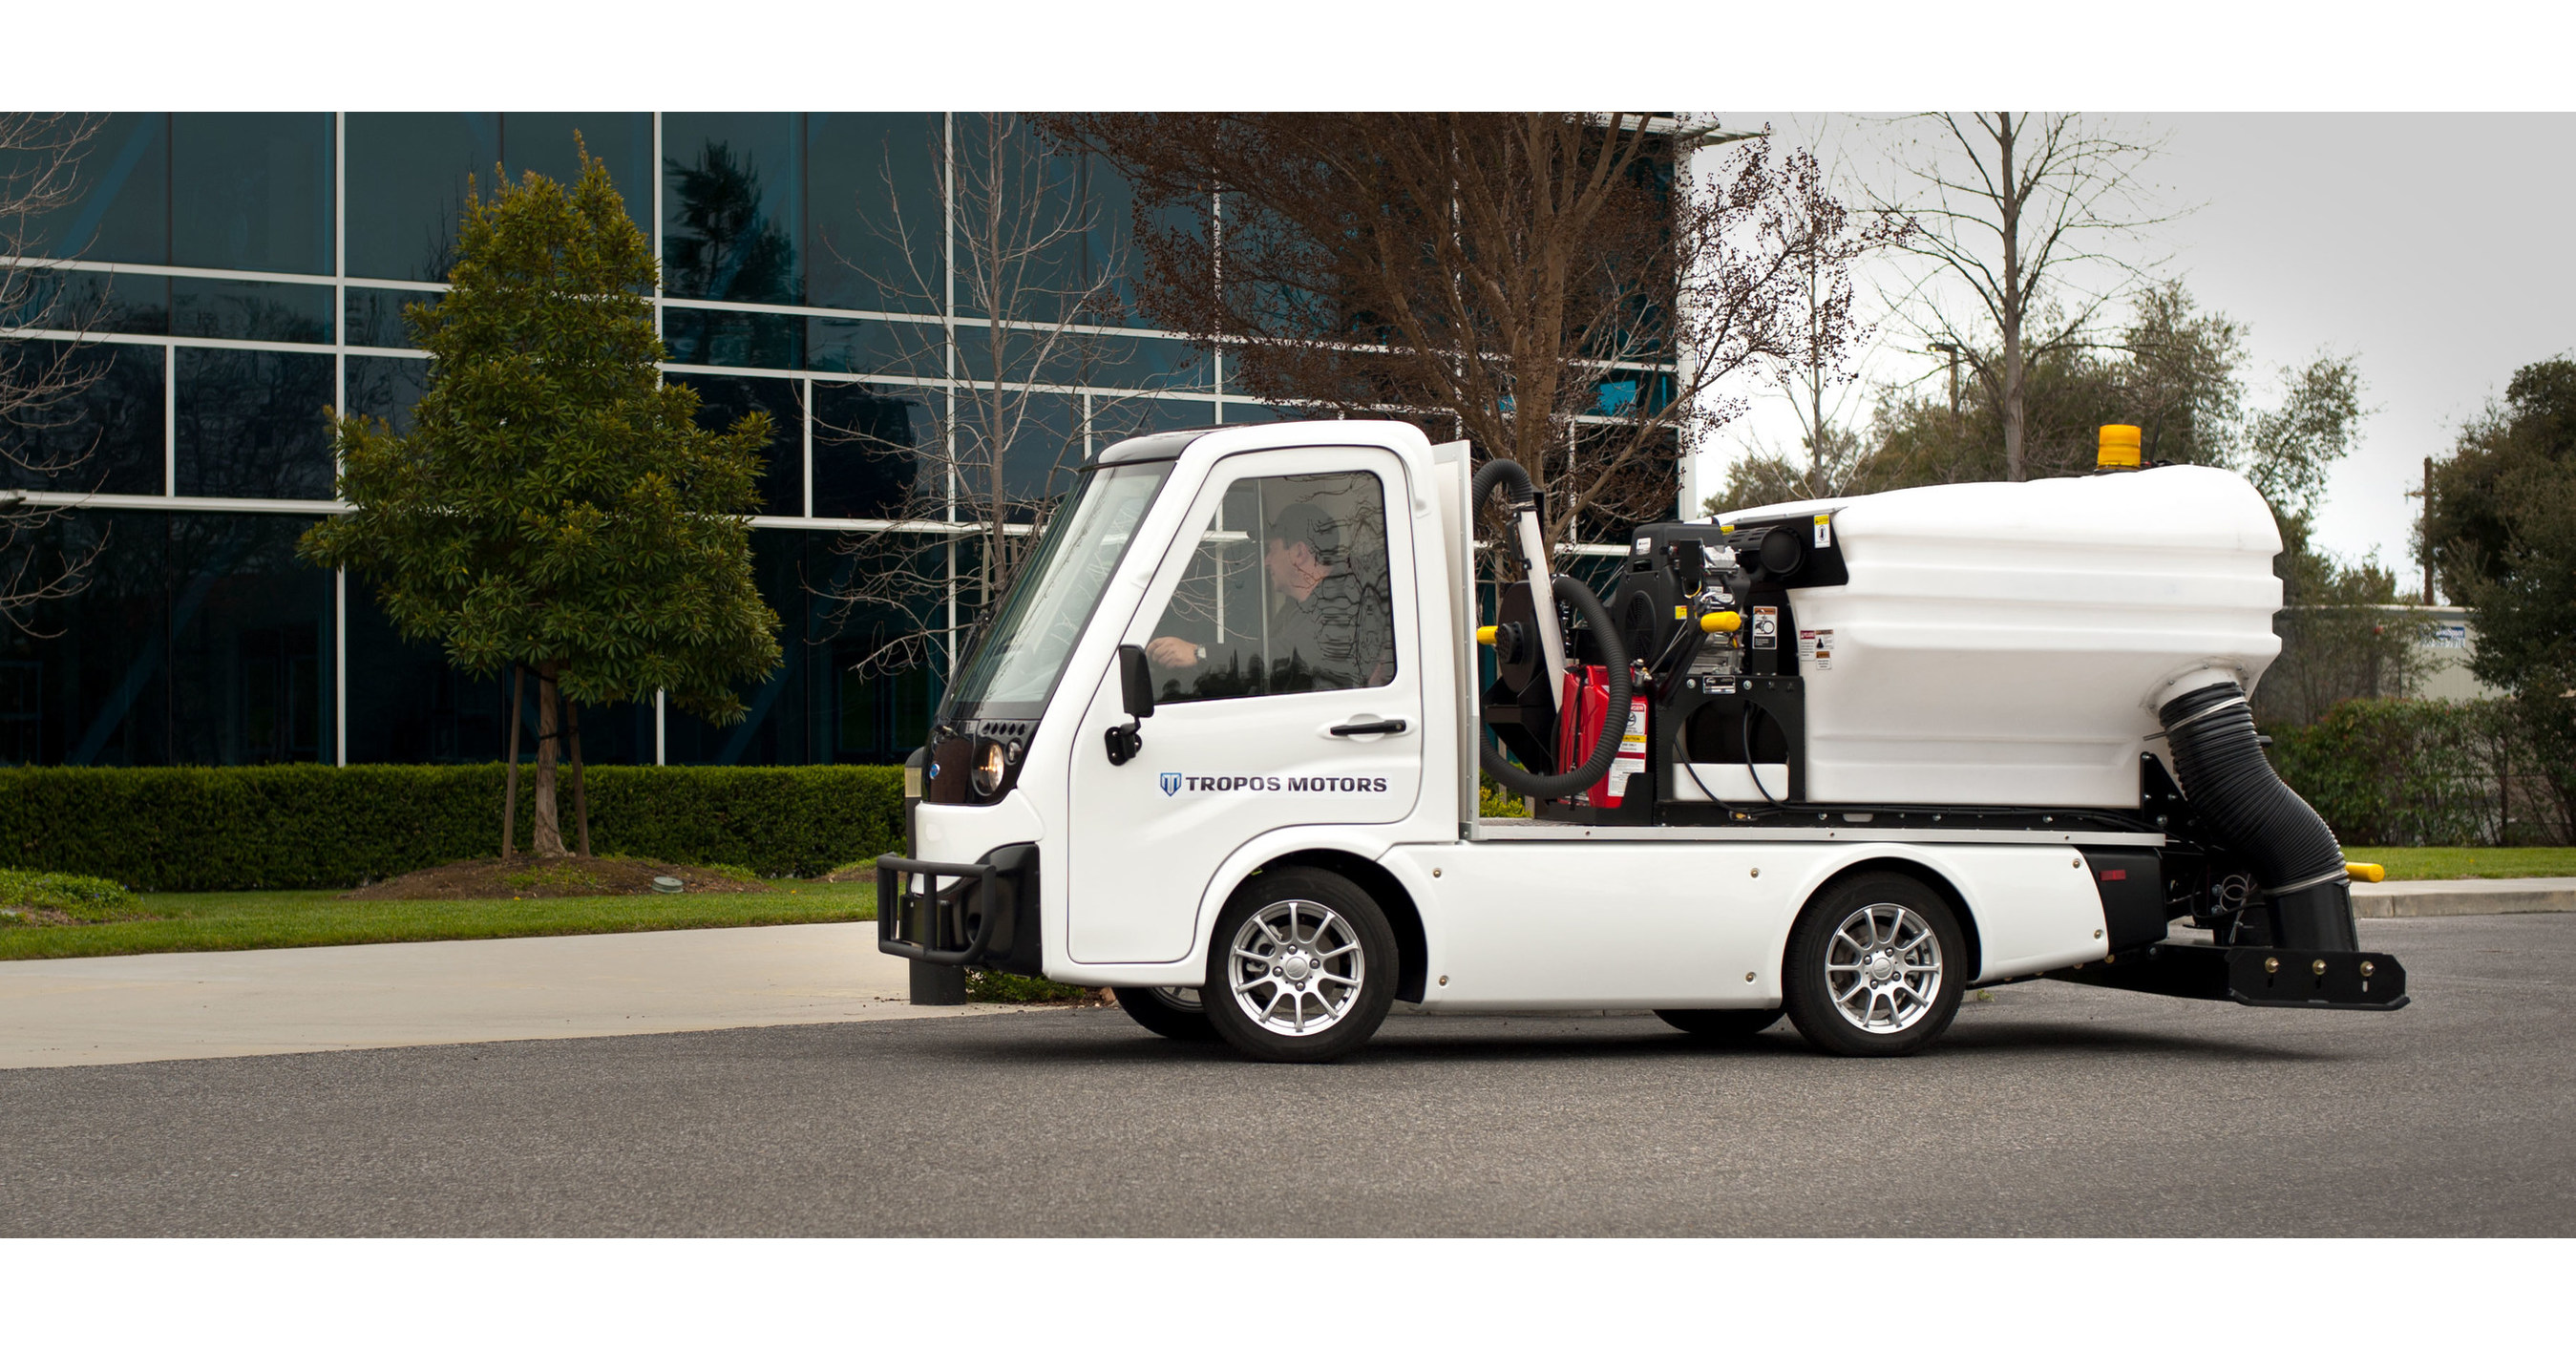 Tropos Motors New Street Sweeper Electric Compact Utility Vehicle 70